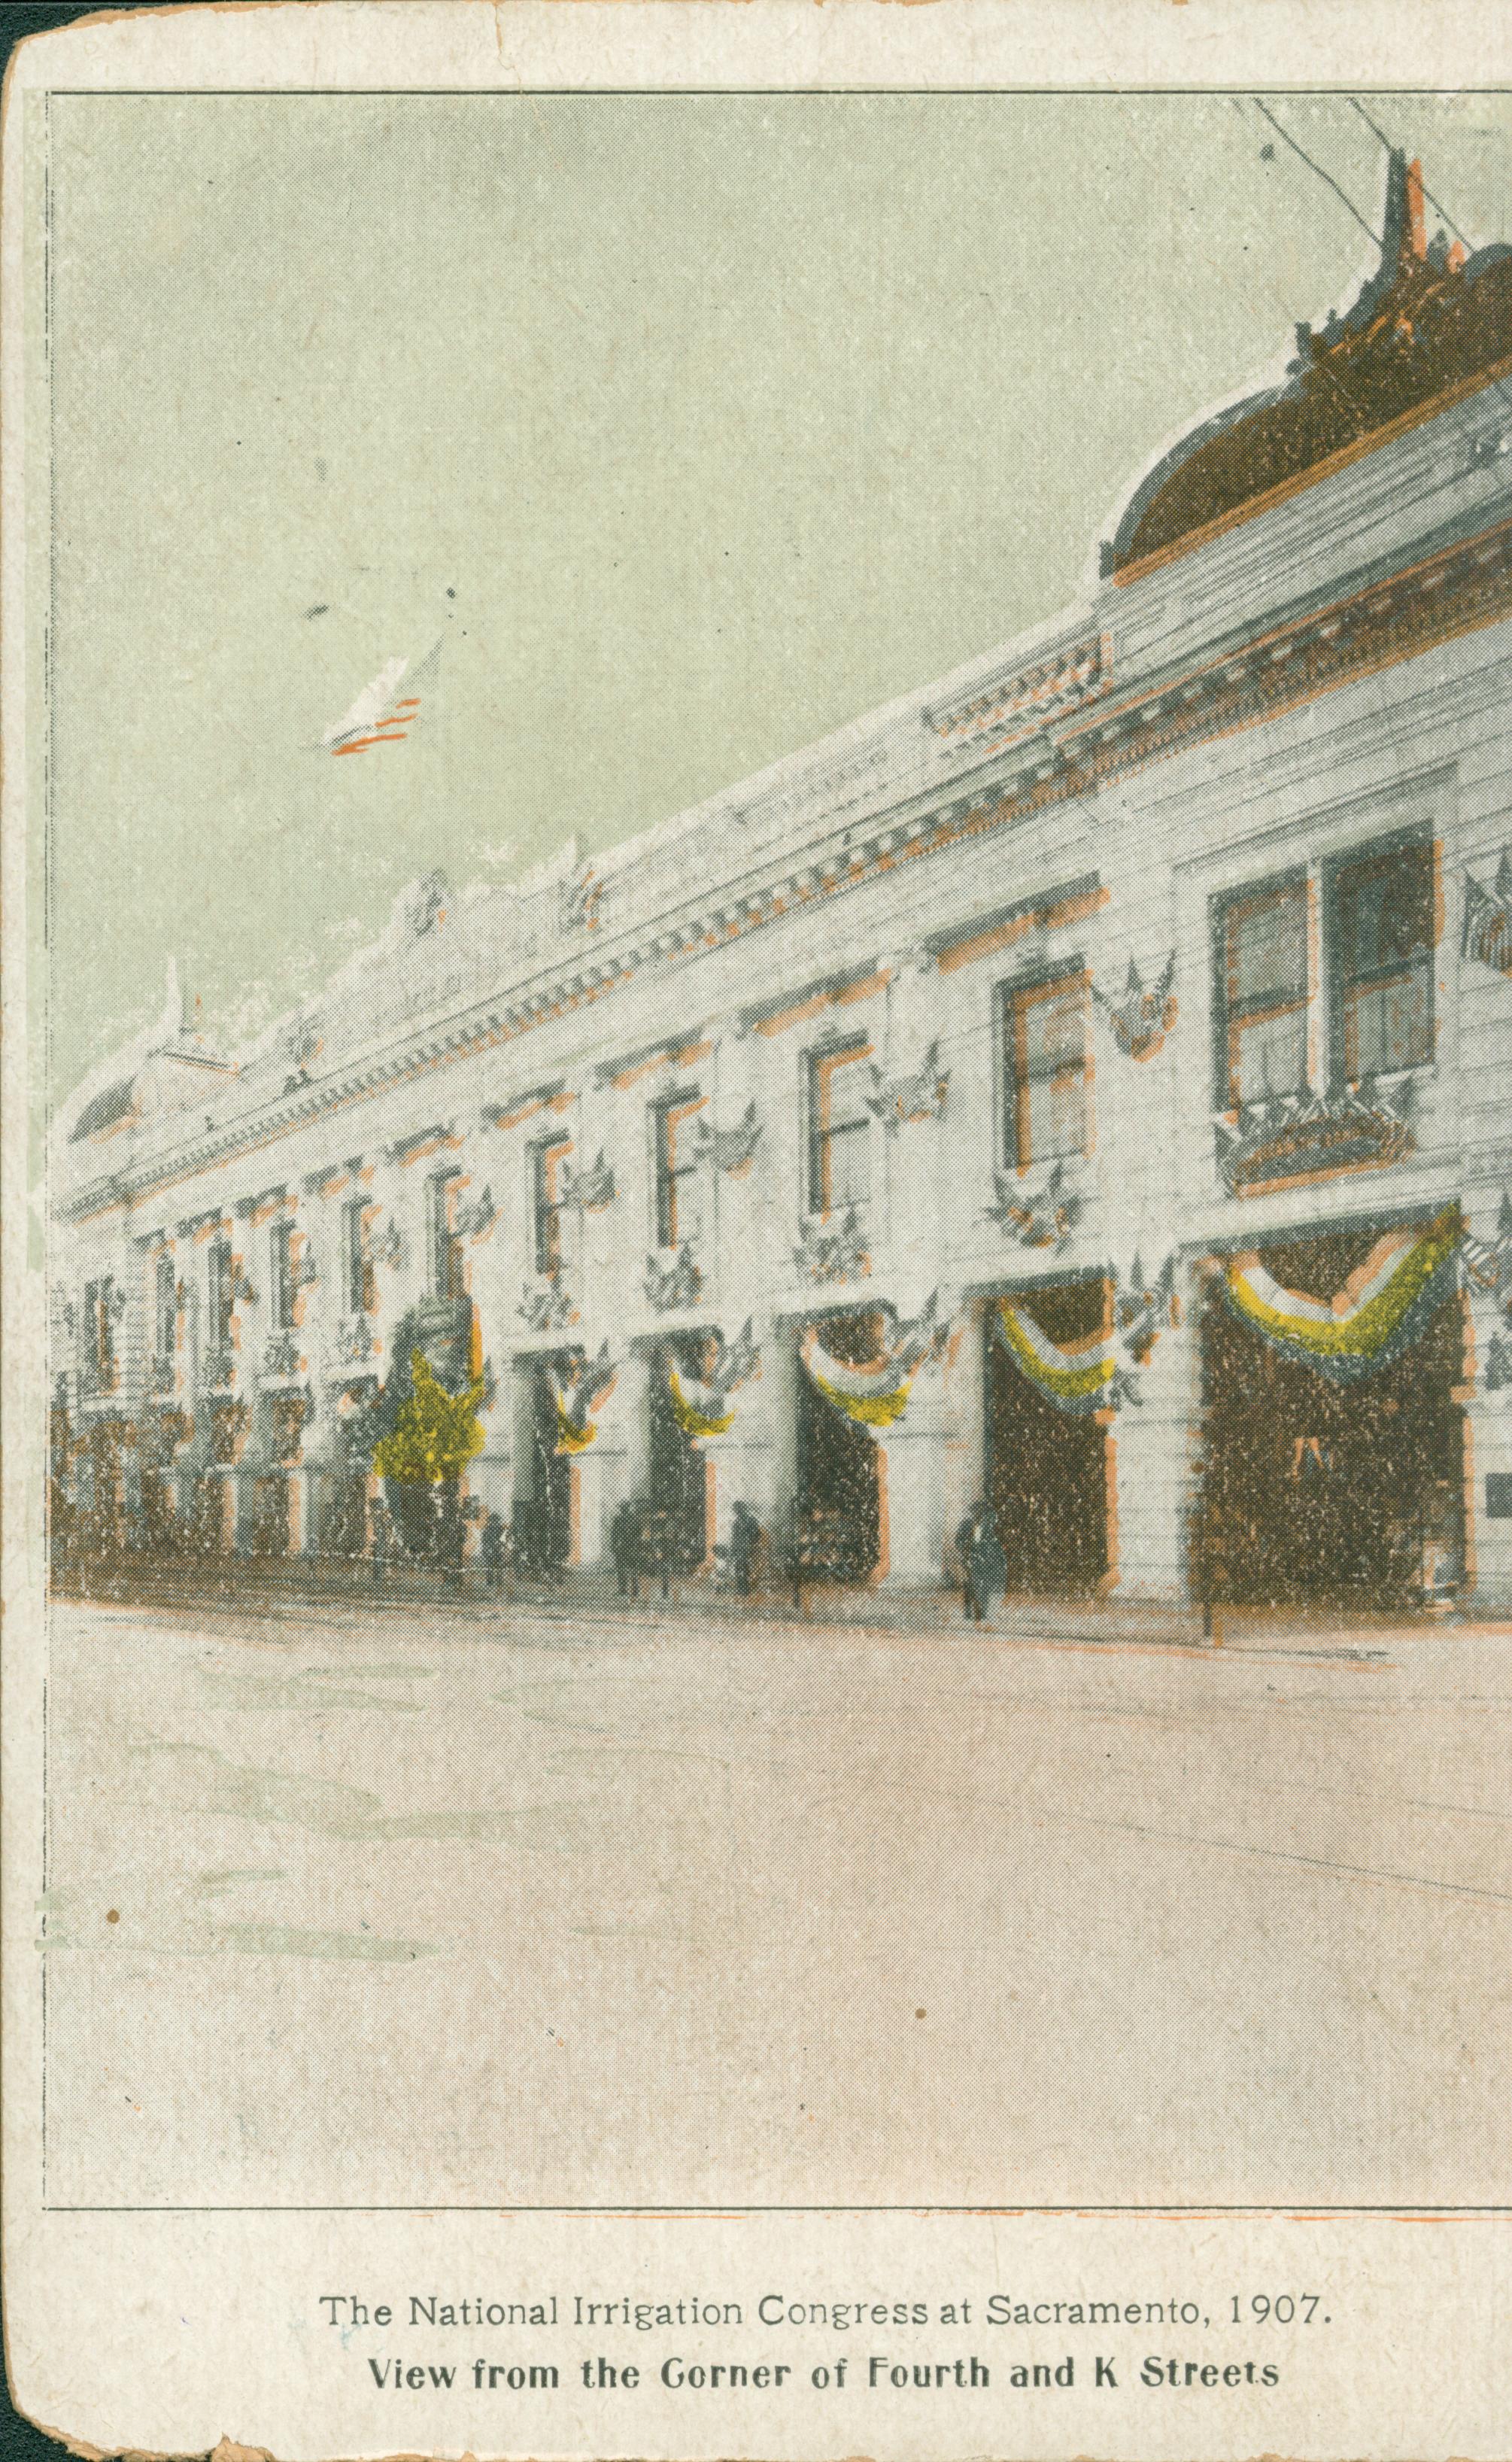 This postcard shows an exterior view of the Irrigation Palace in Sacramento.